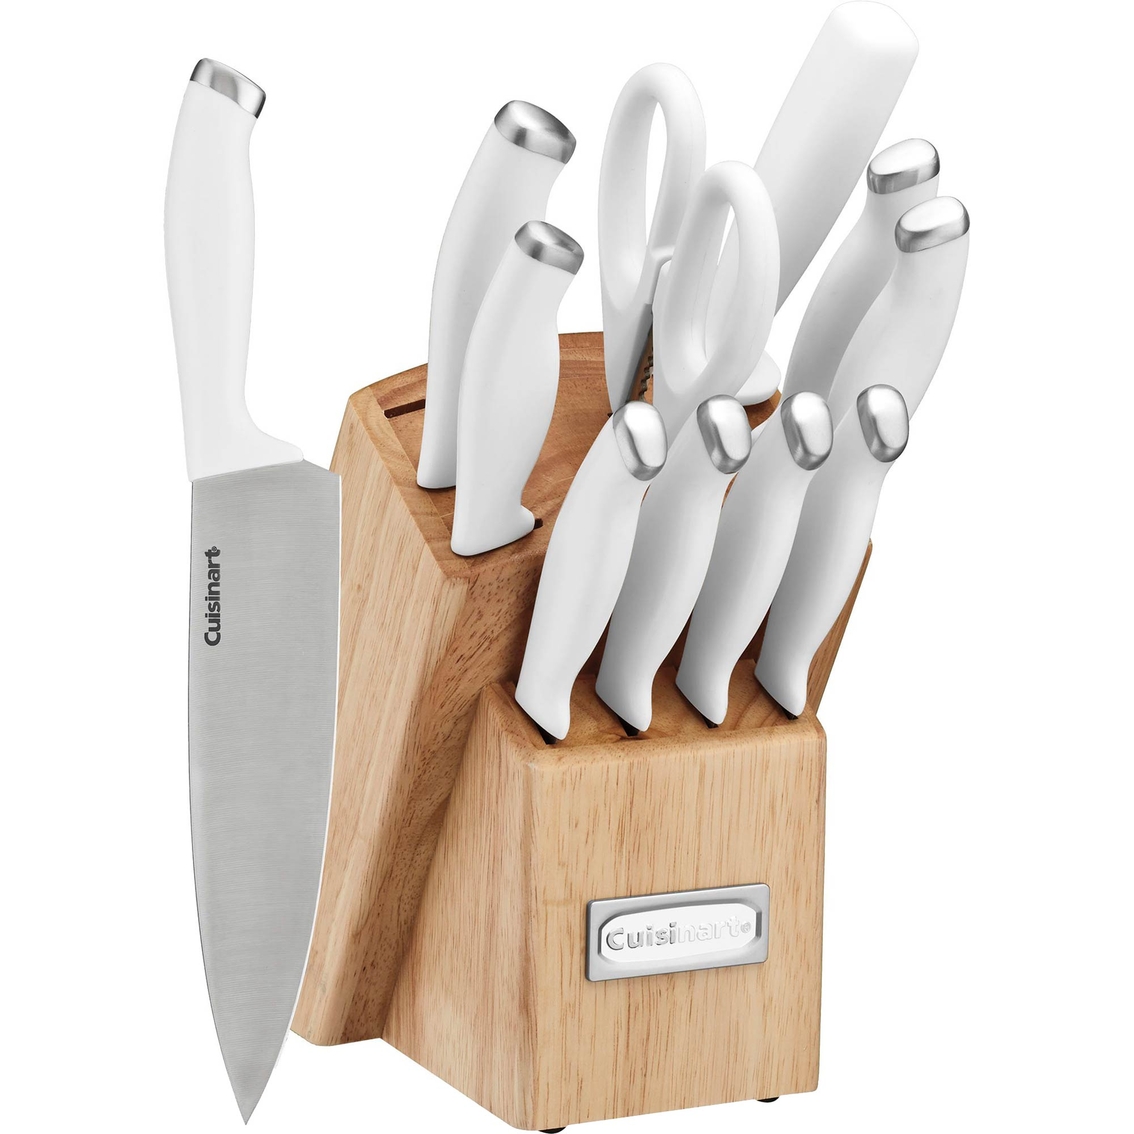 Cuisinart ColorPro Collection 12 pc. Black and Stainless Steel Cutlery Block Set - Image 2 of 4